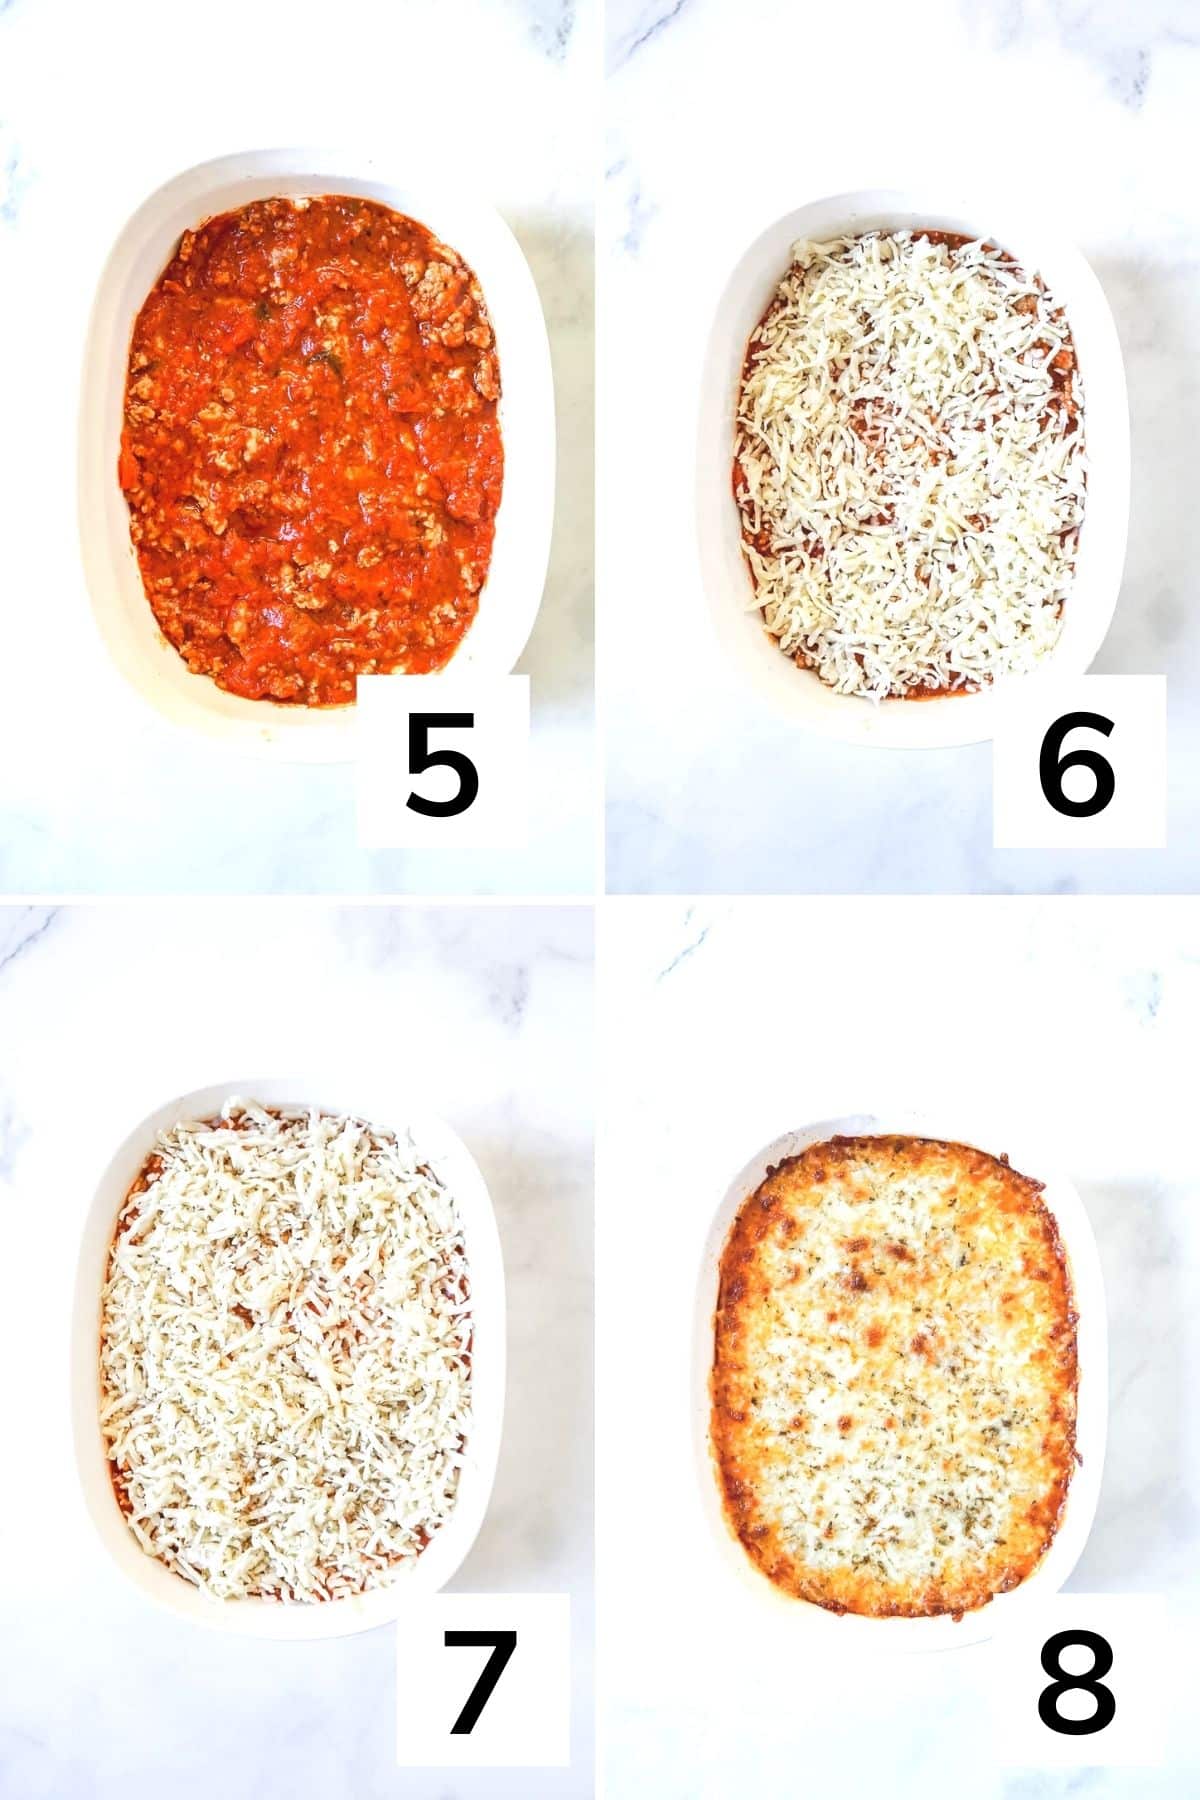 How to make Lasagna Dip with Sausage step by step.